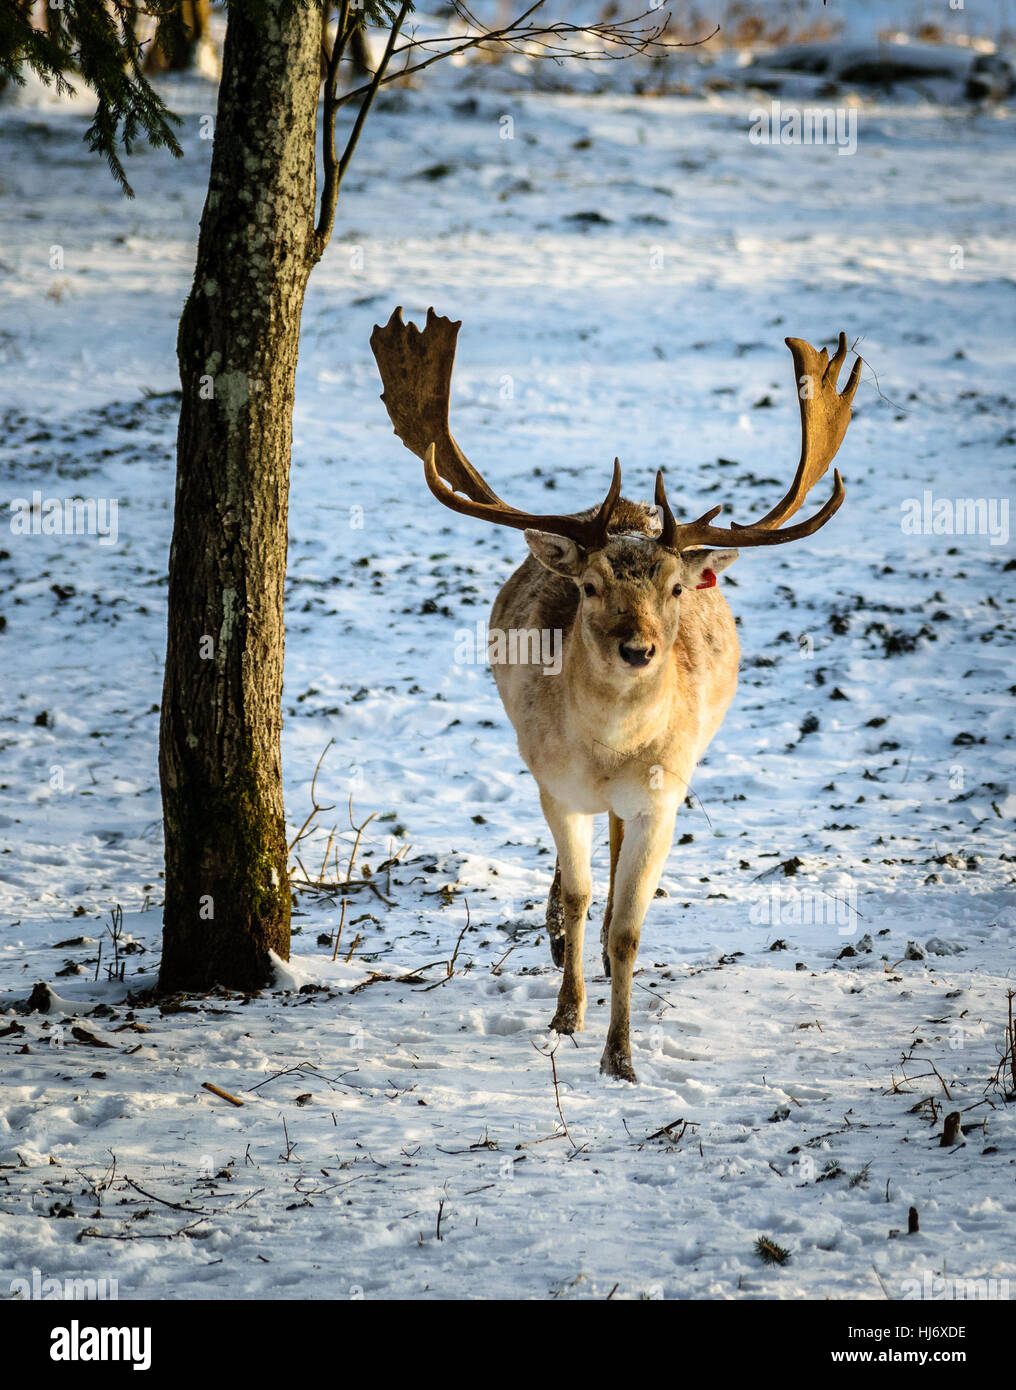 Deer With Large Antler in the Winter Forest Wildlife Photograph Stock Photo